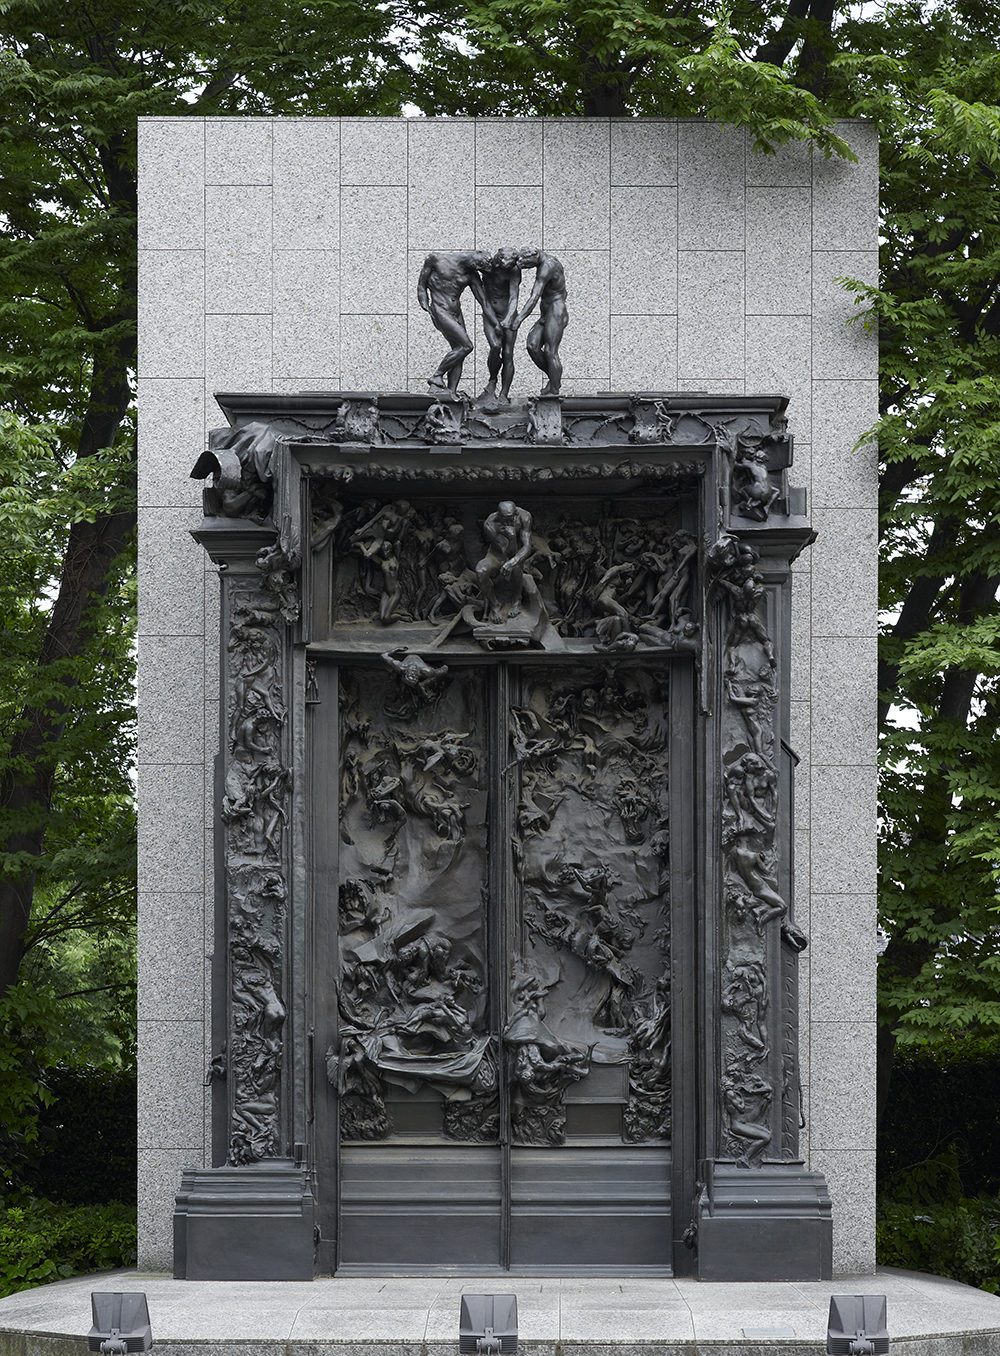 photo:Auguste Rodin
The Gates of Hell